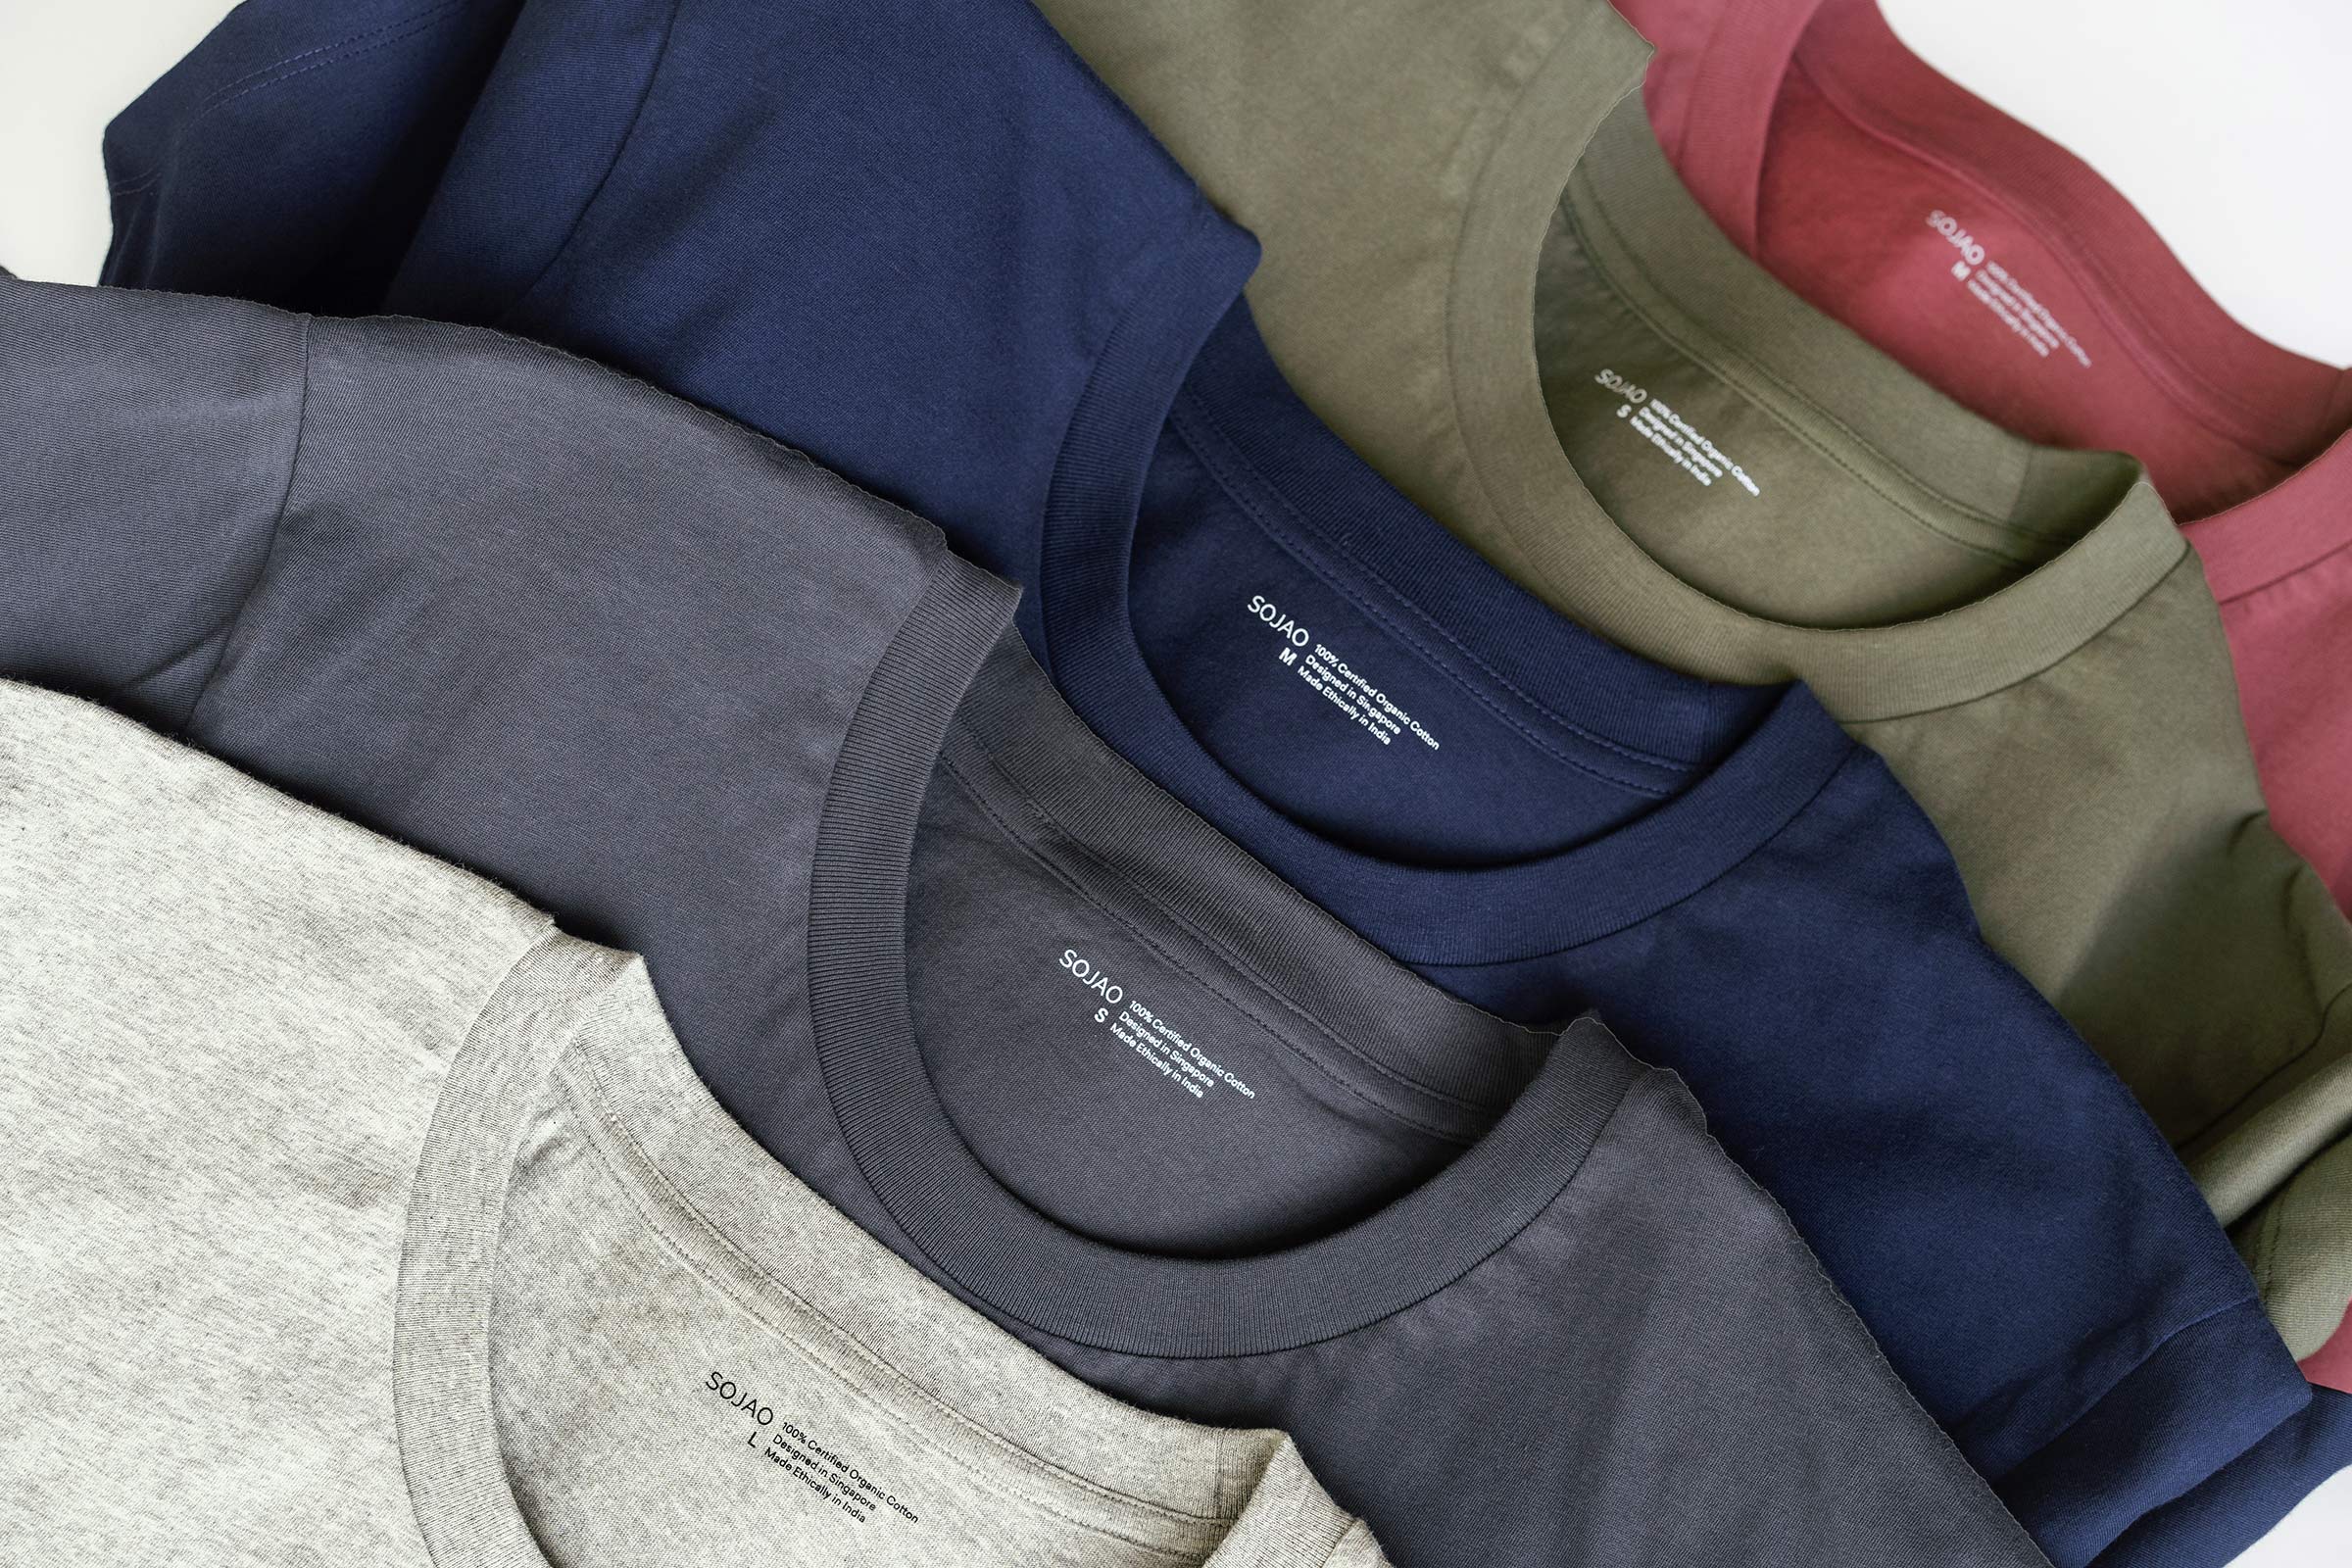 organic-cotton-mens-tee-details-pebble-midnight-navy-rouge-olive-in-multi-variants-colour-by-sojao